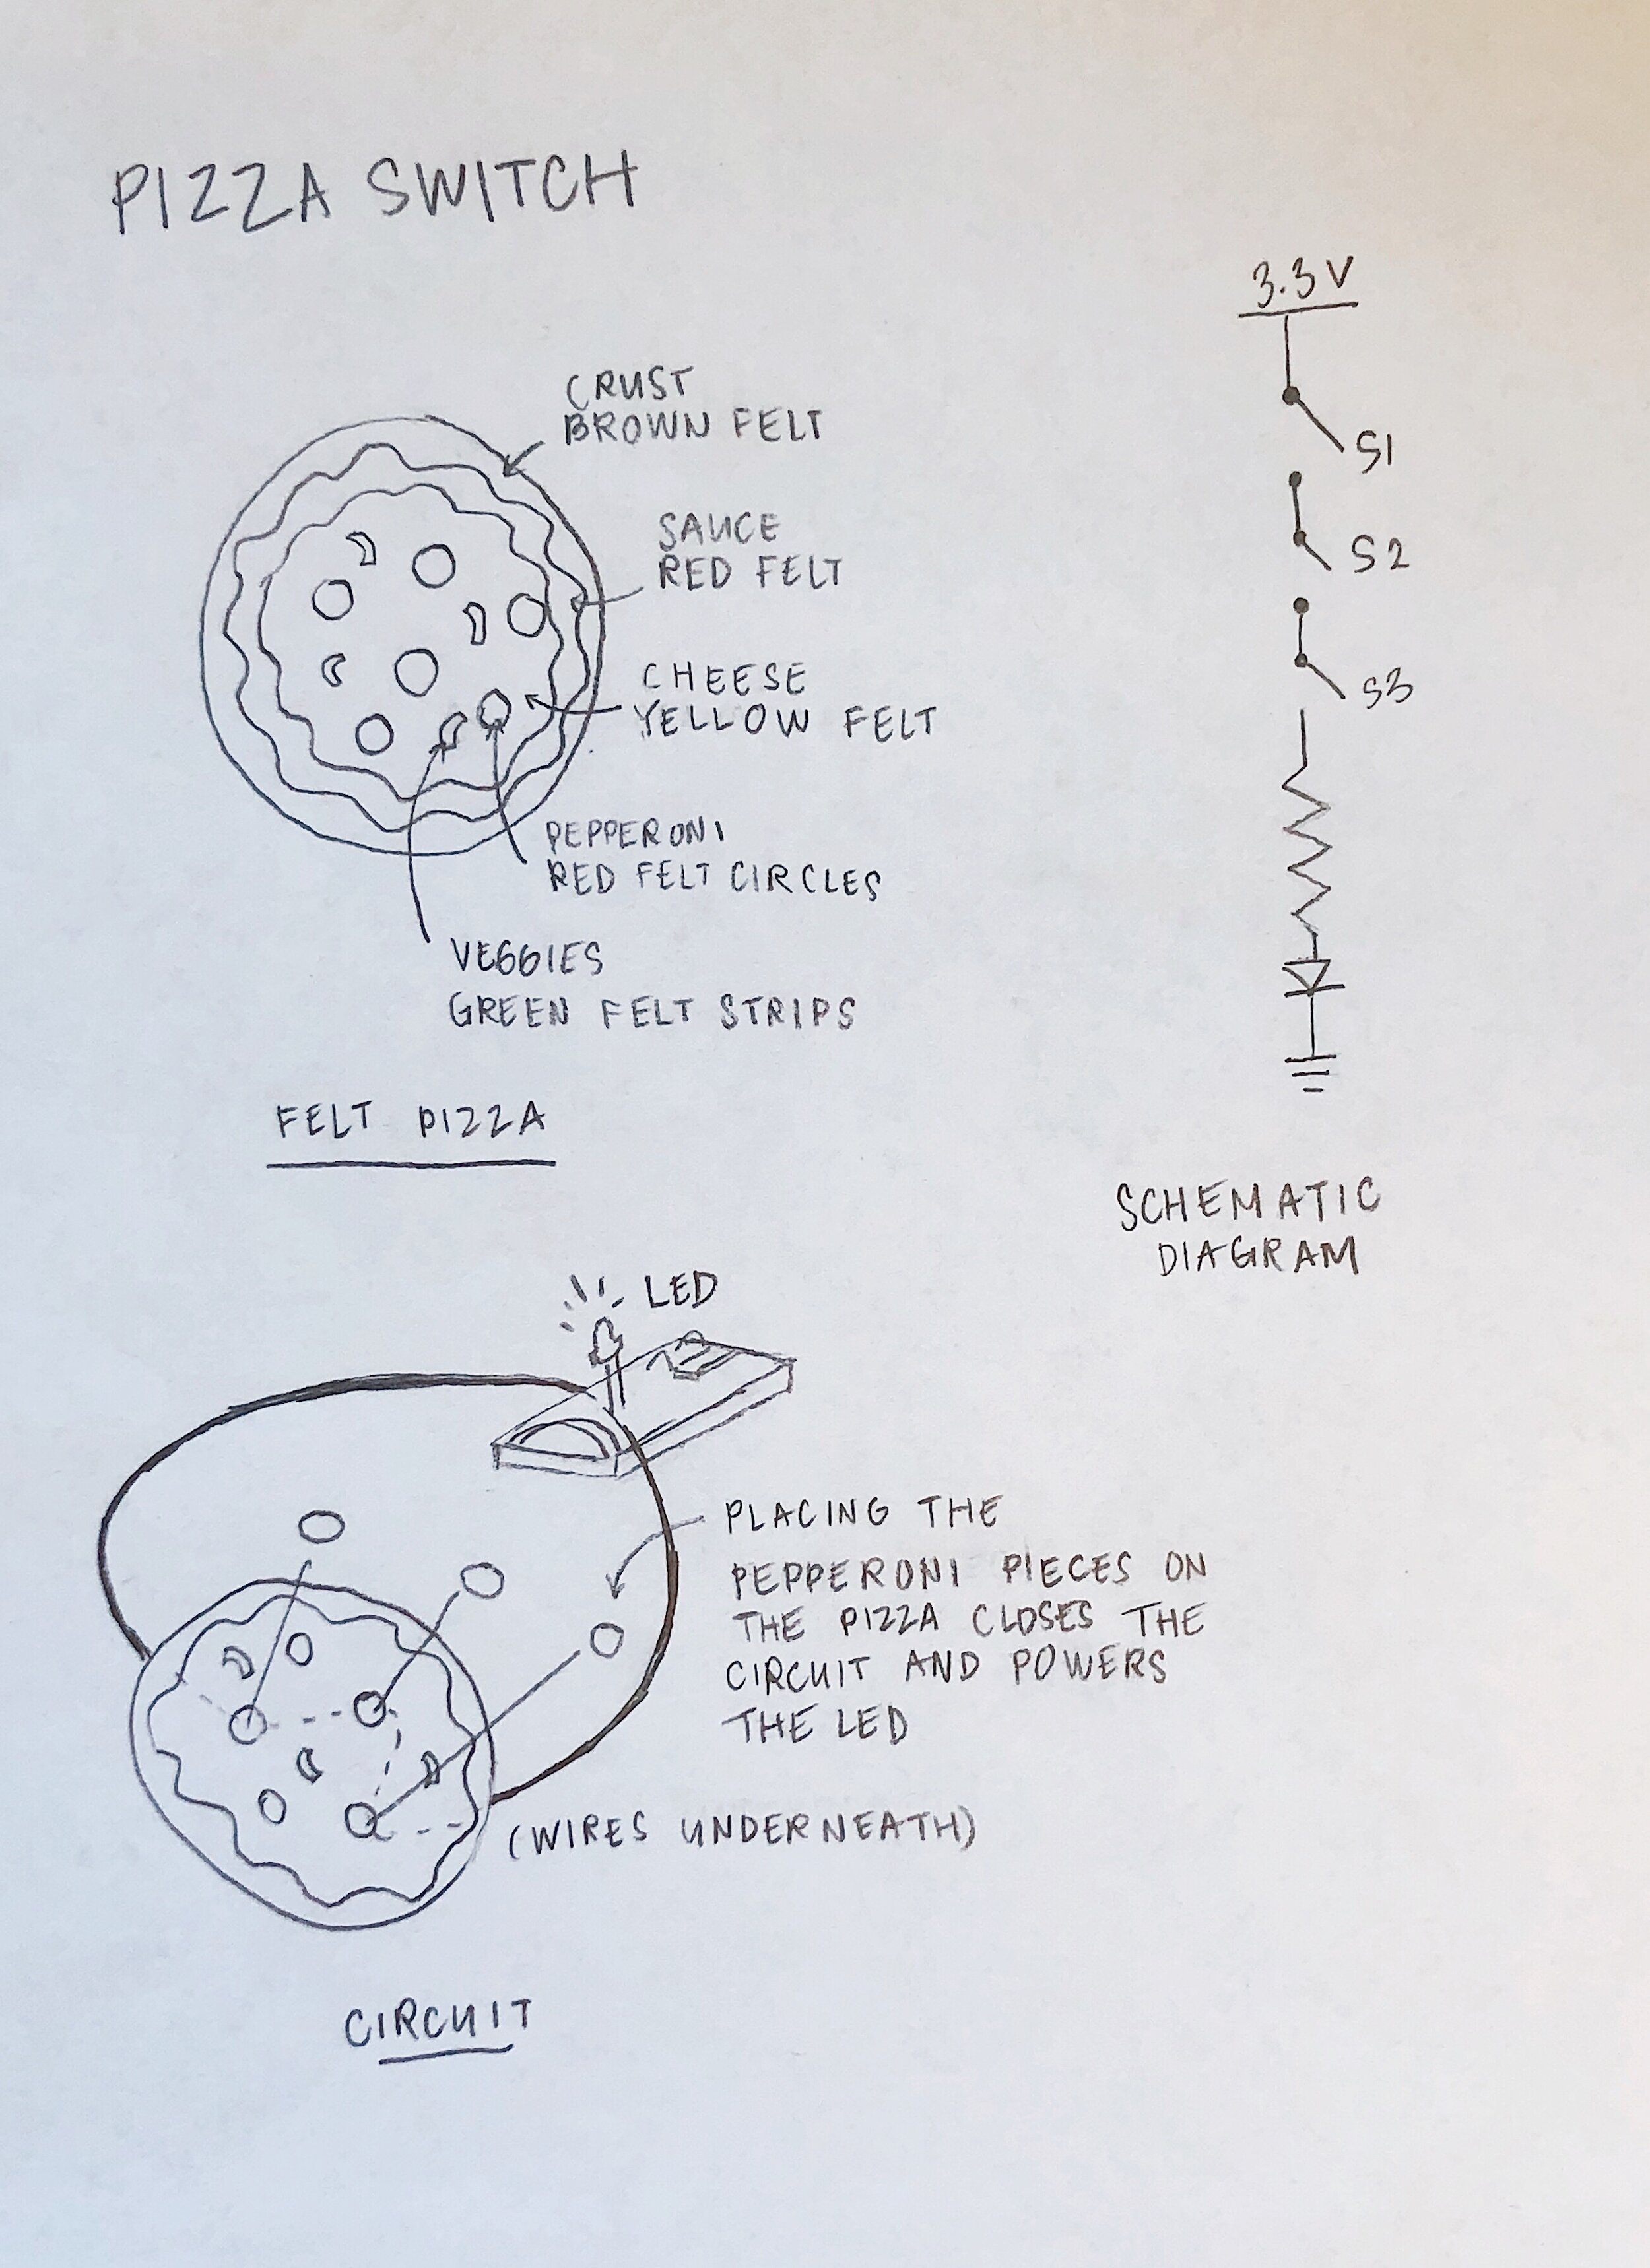 Sketches of the Pizza Switch Concept